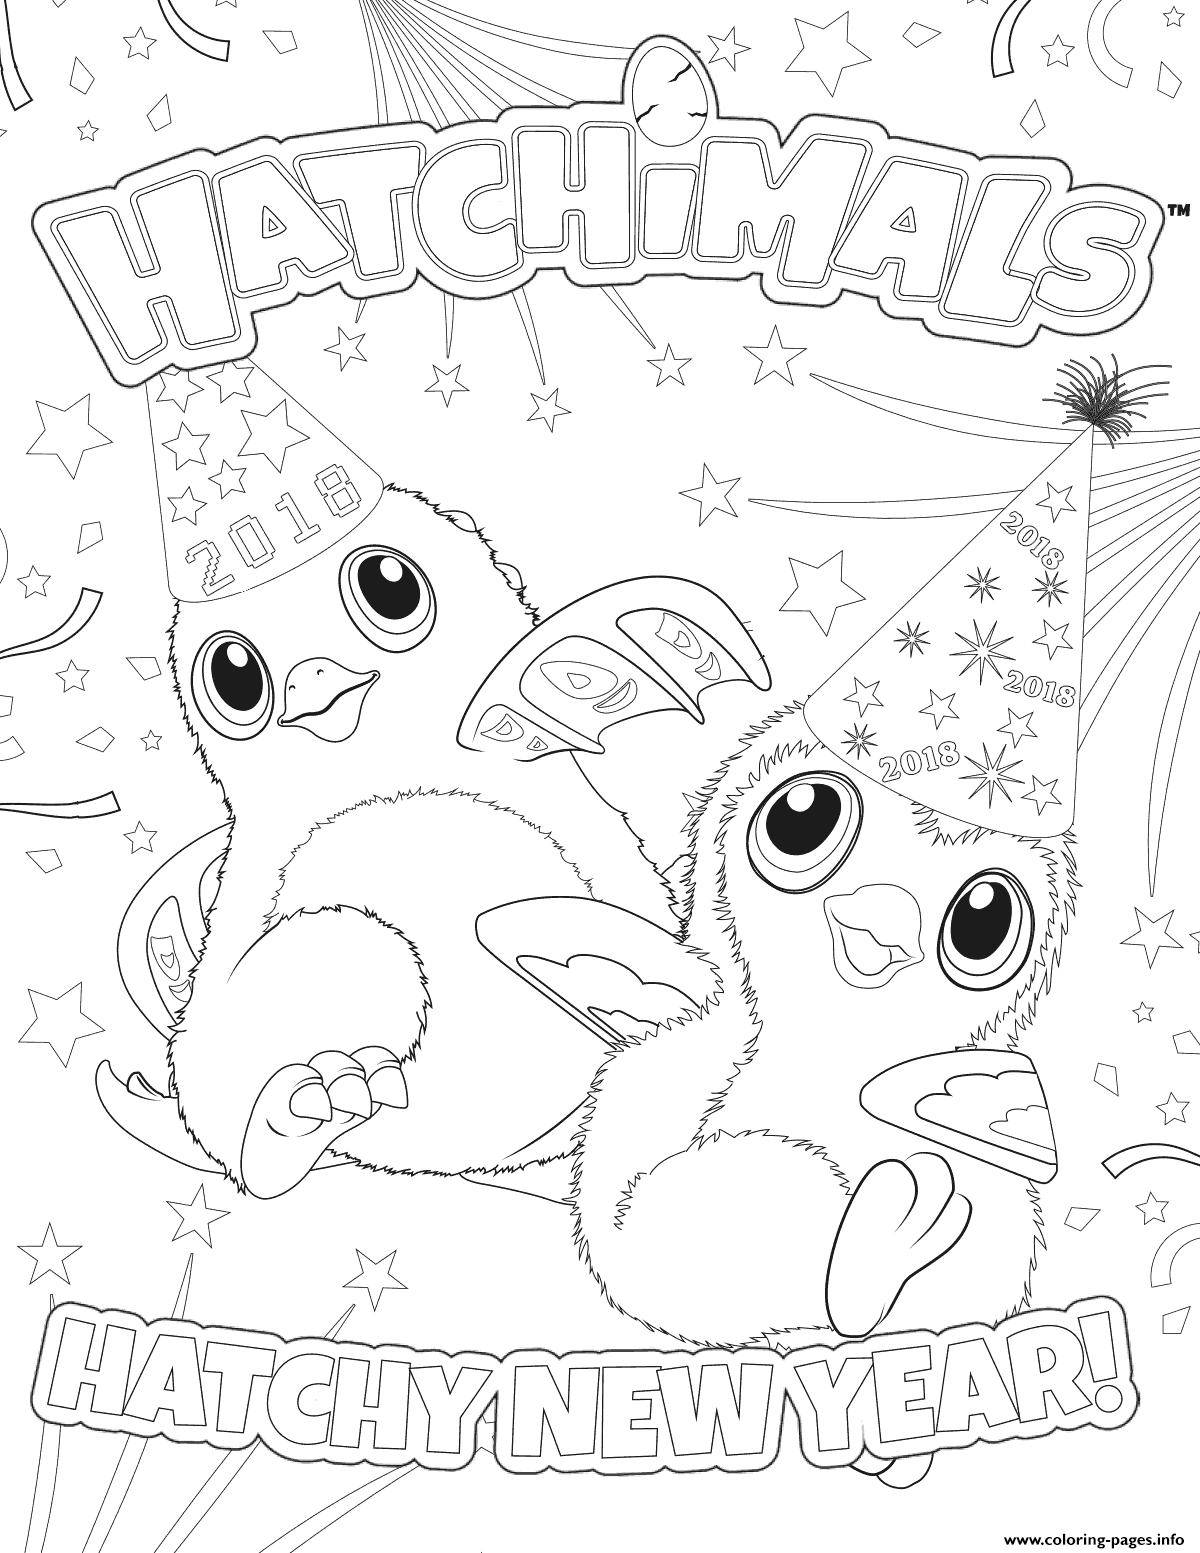 Hatchimals Happy New Year 2018 coloring